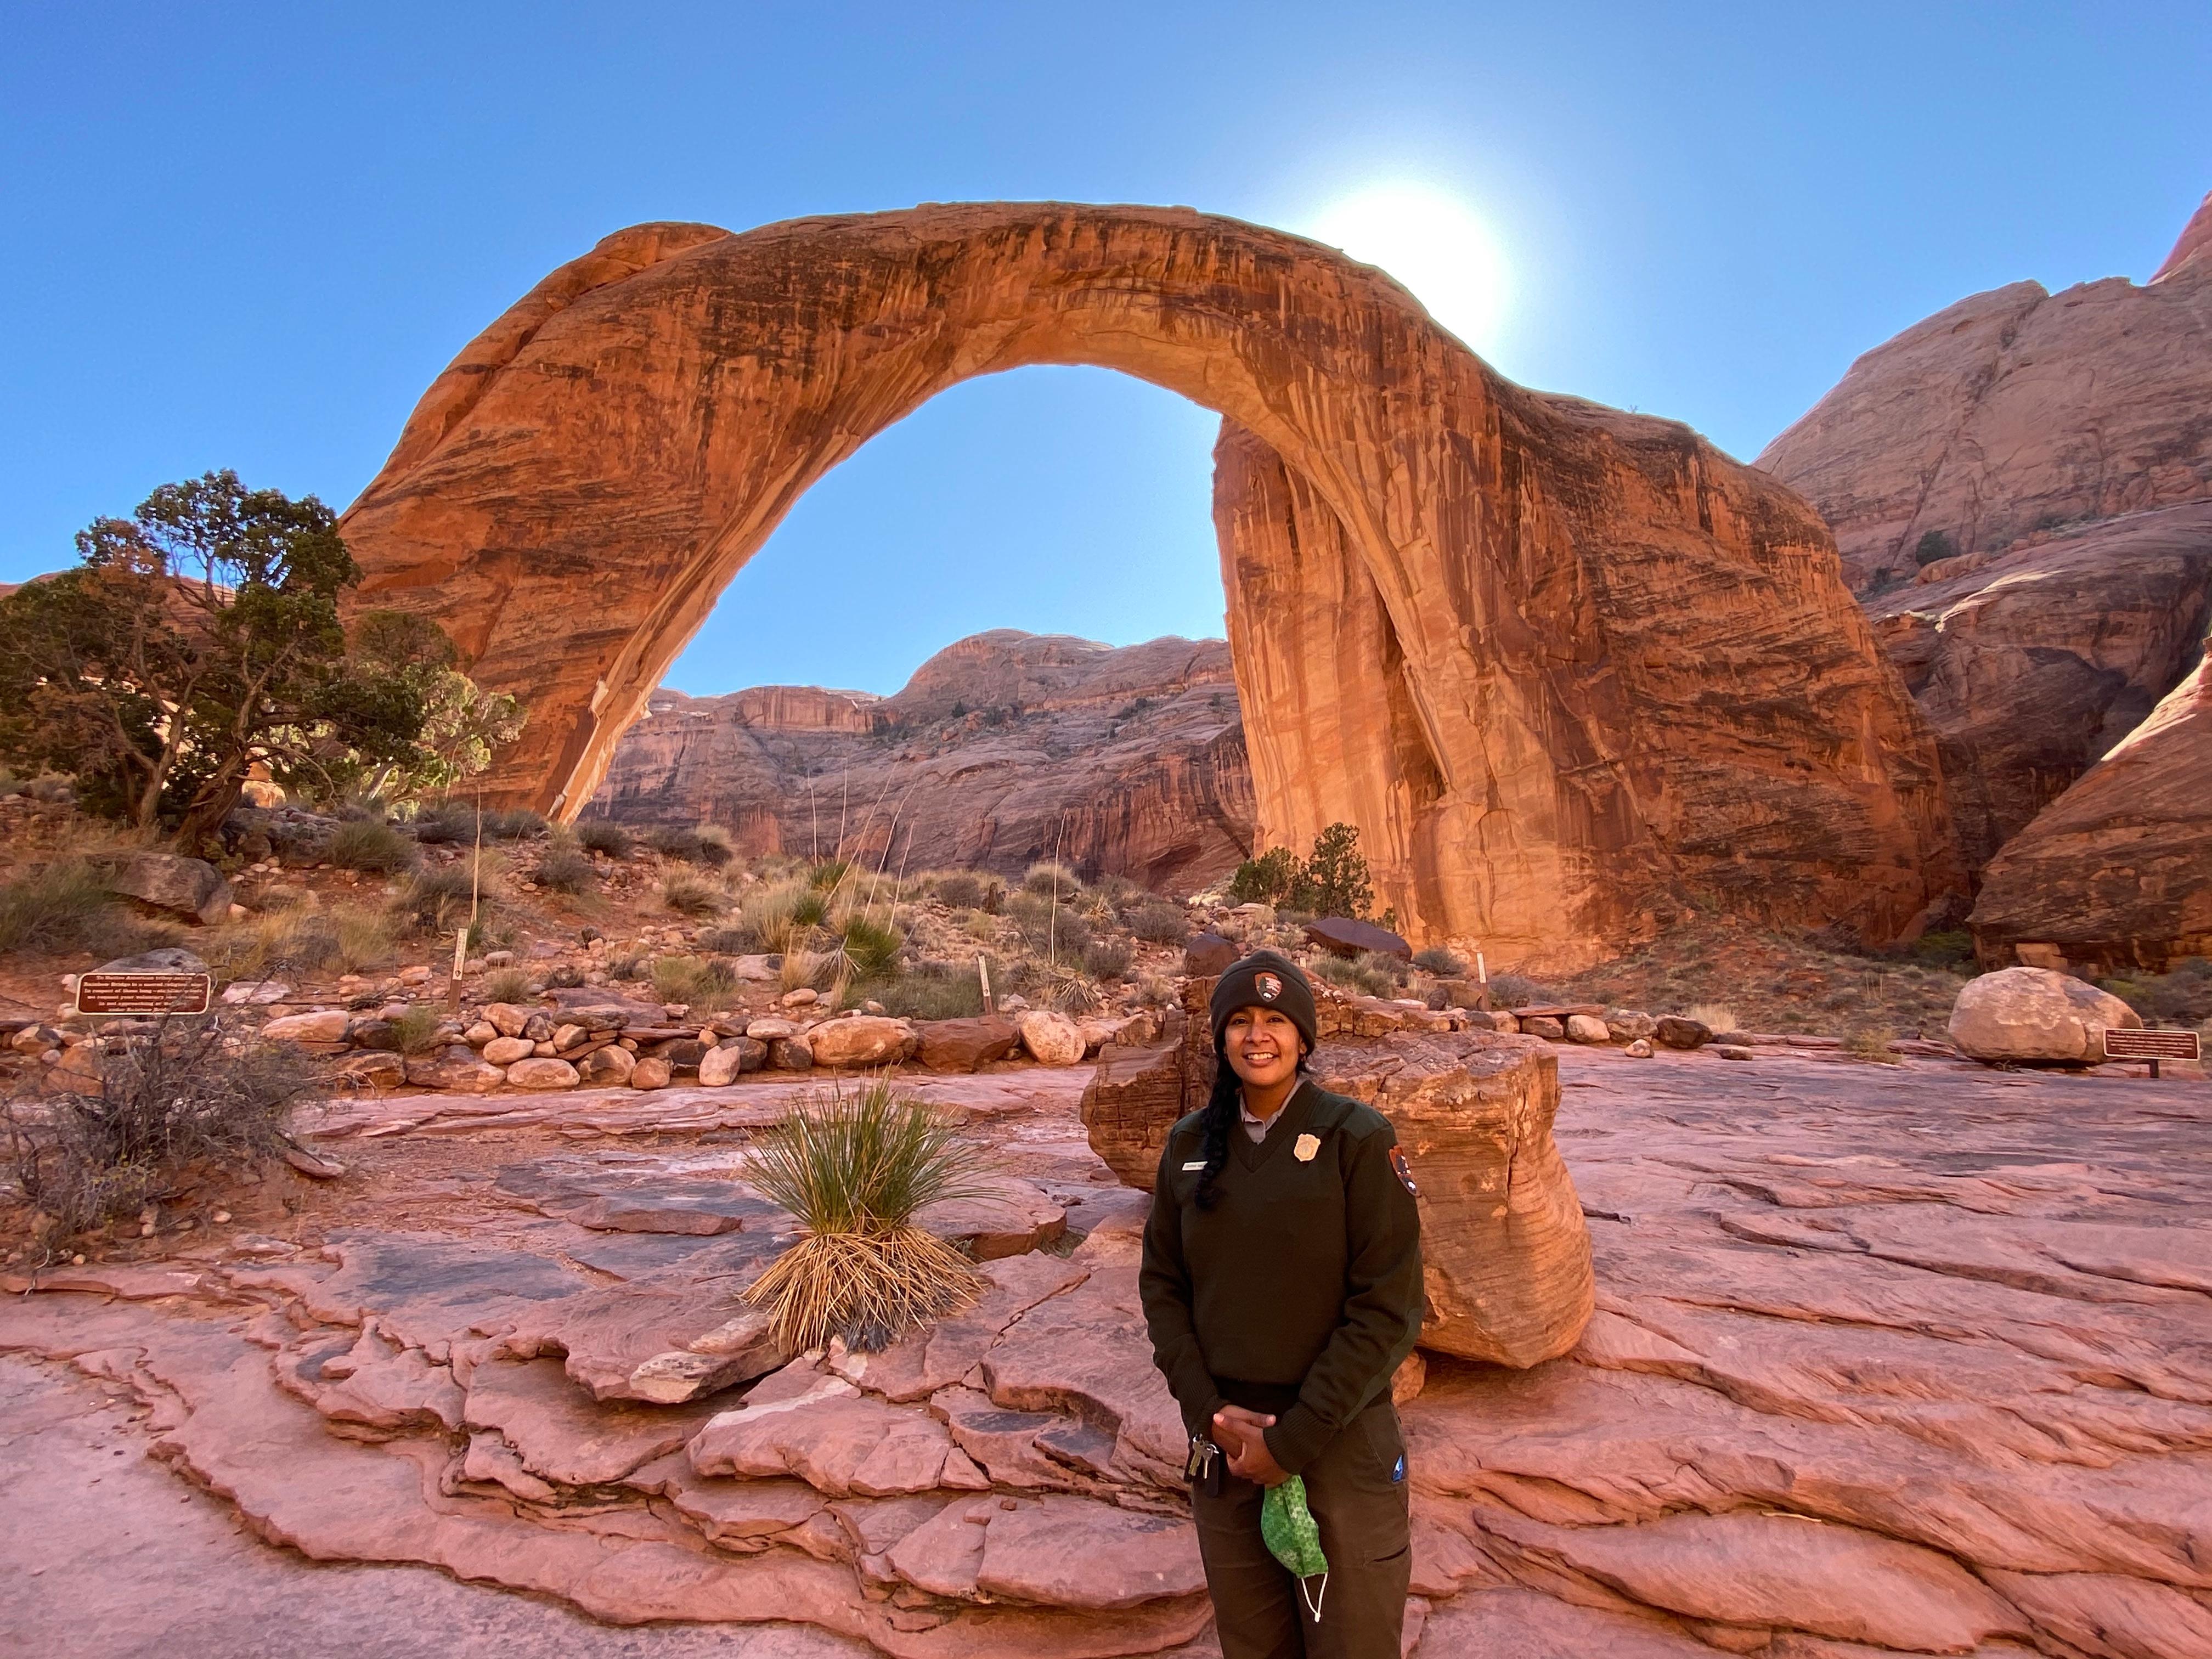 Park Ranger standing in front of perfectly curved sandstone arch